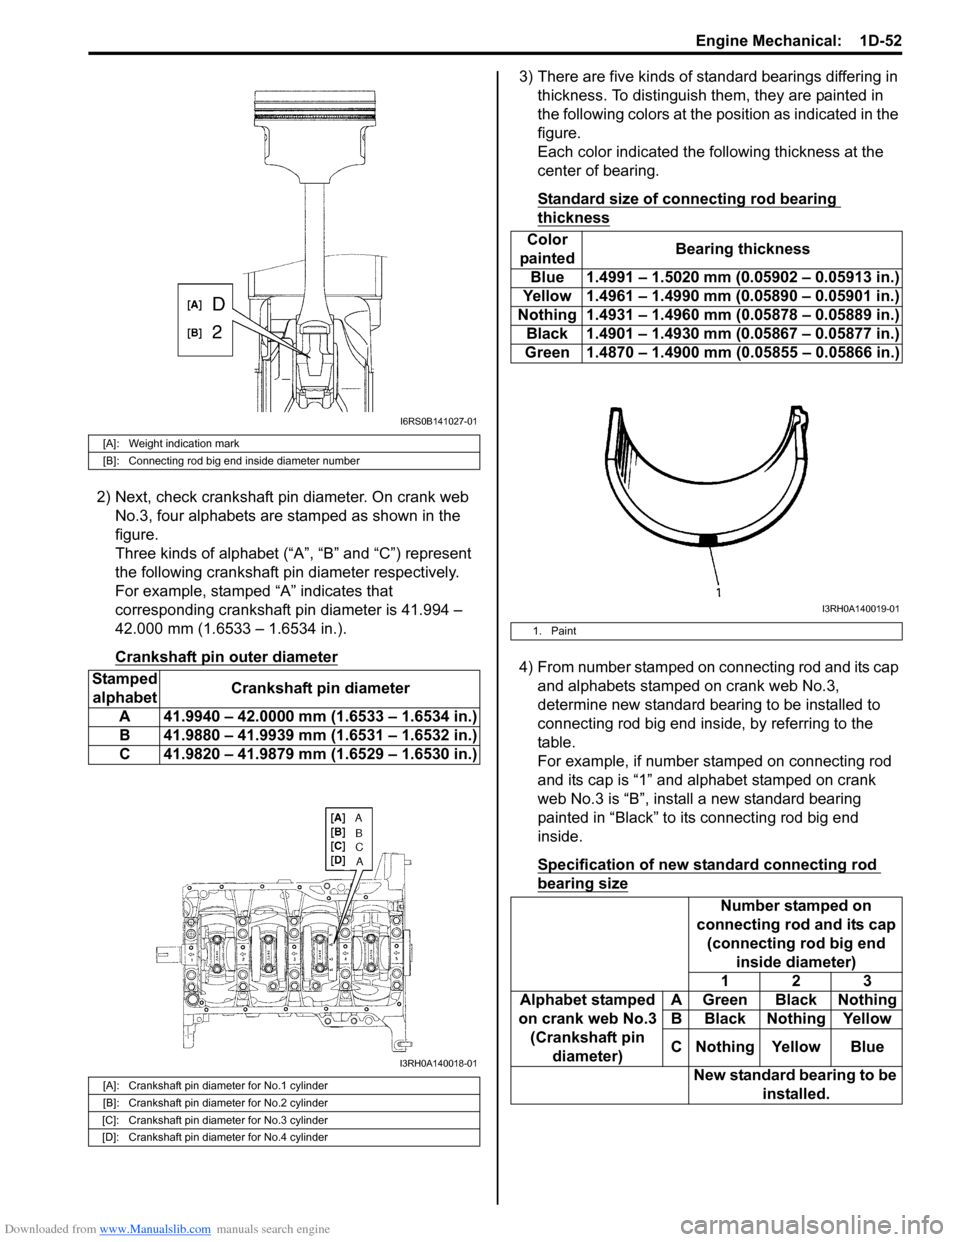 SUZUKI SWIFT 2006 2.G Service Workshop Manual Downloaded from www.Manualslib.com manuals search engine Engine Mechanical:  1D-52
2) Next, check crankshaft pin diameter. On crank web No.3, four alphabets are stamped as shown in the 
figure.
Three 